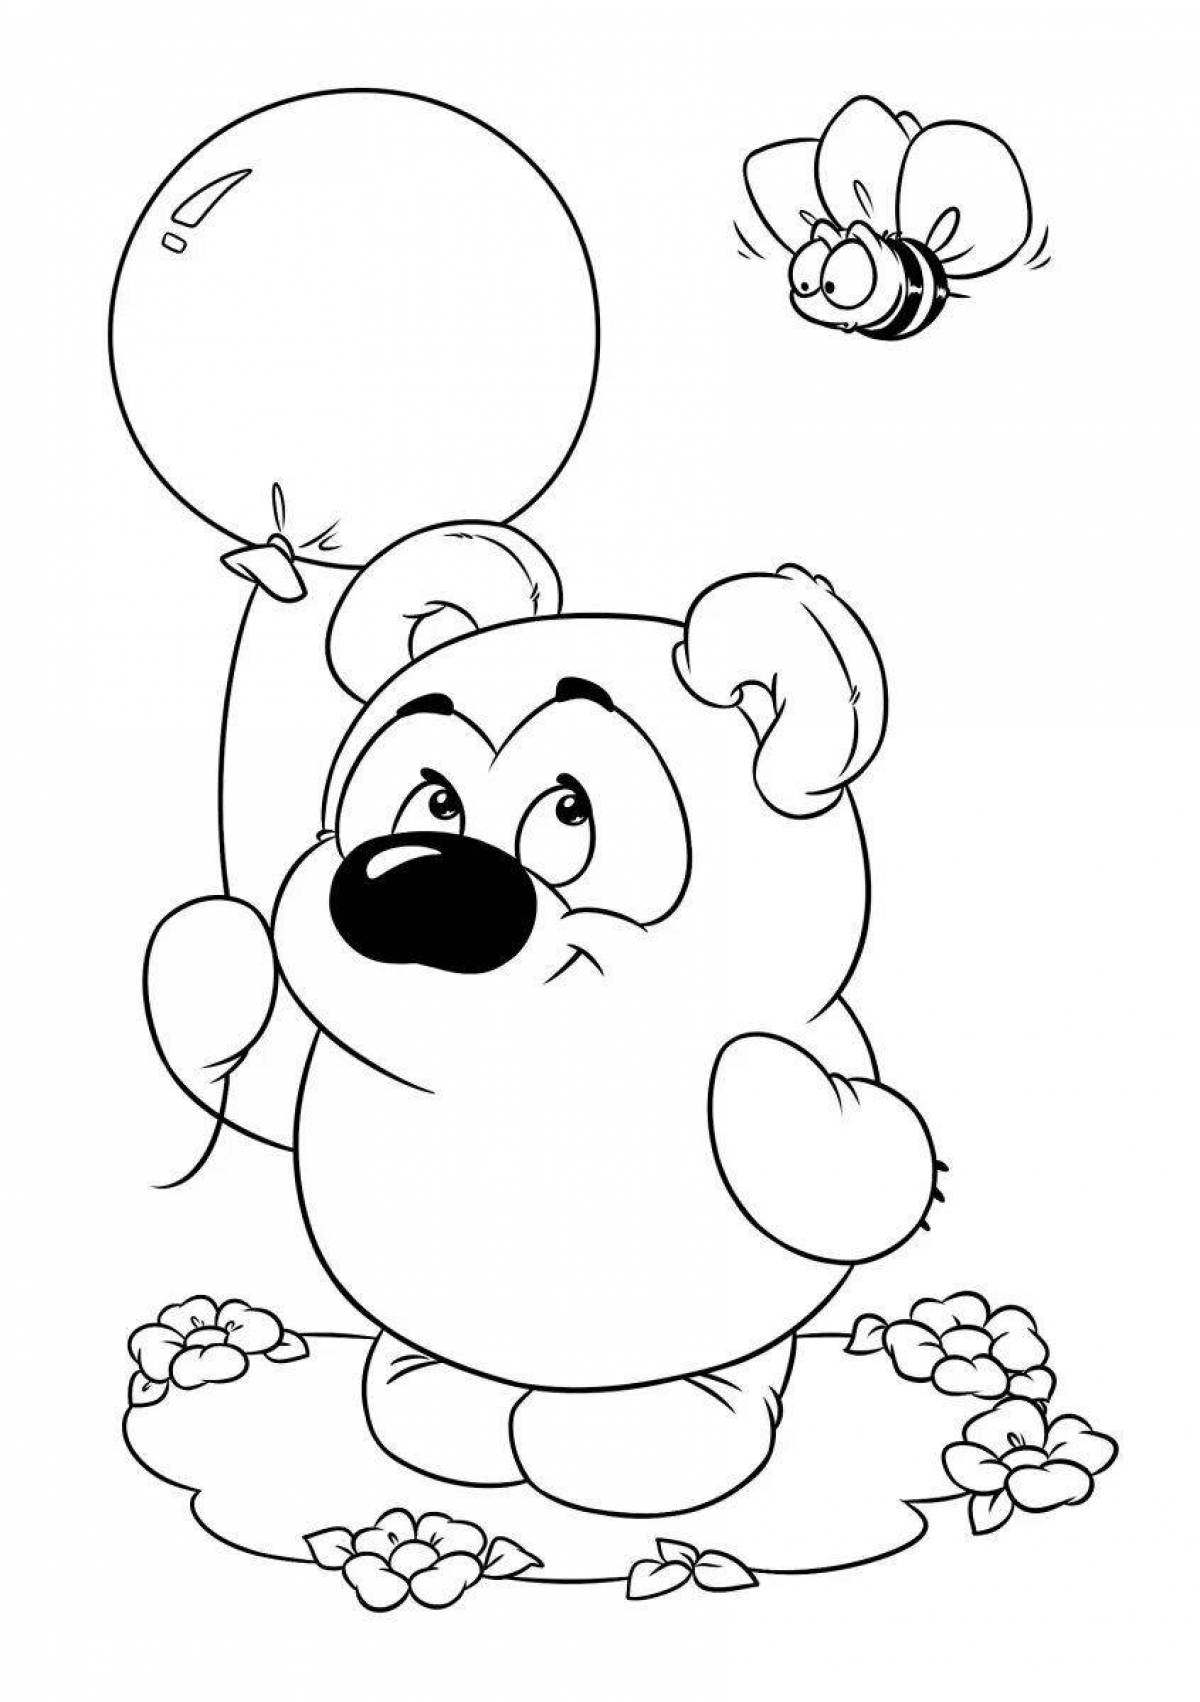 Animated Winnie the Pooh with balloon